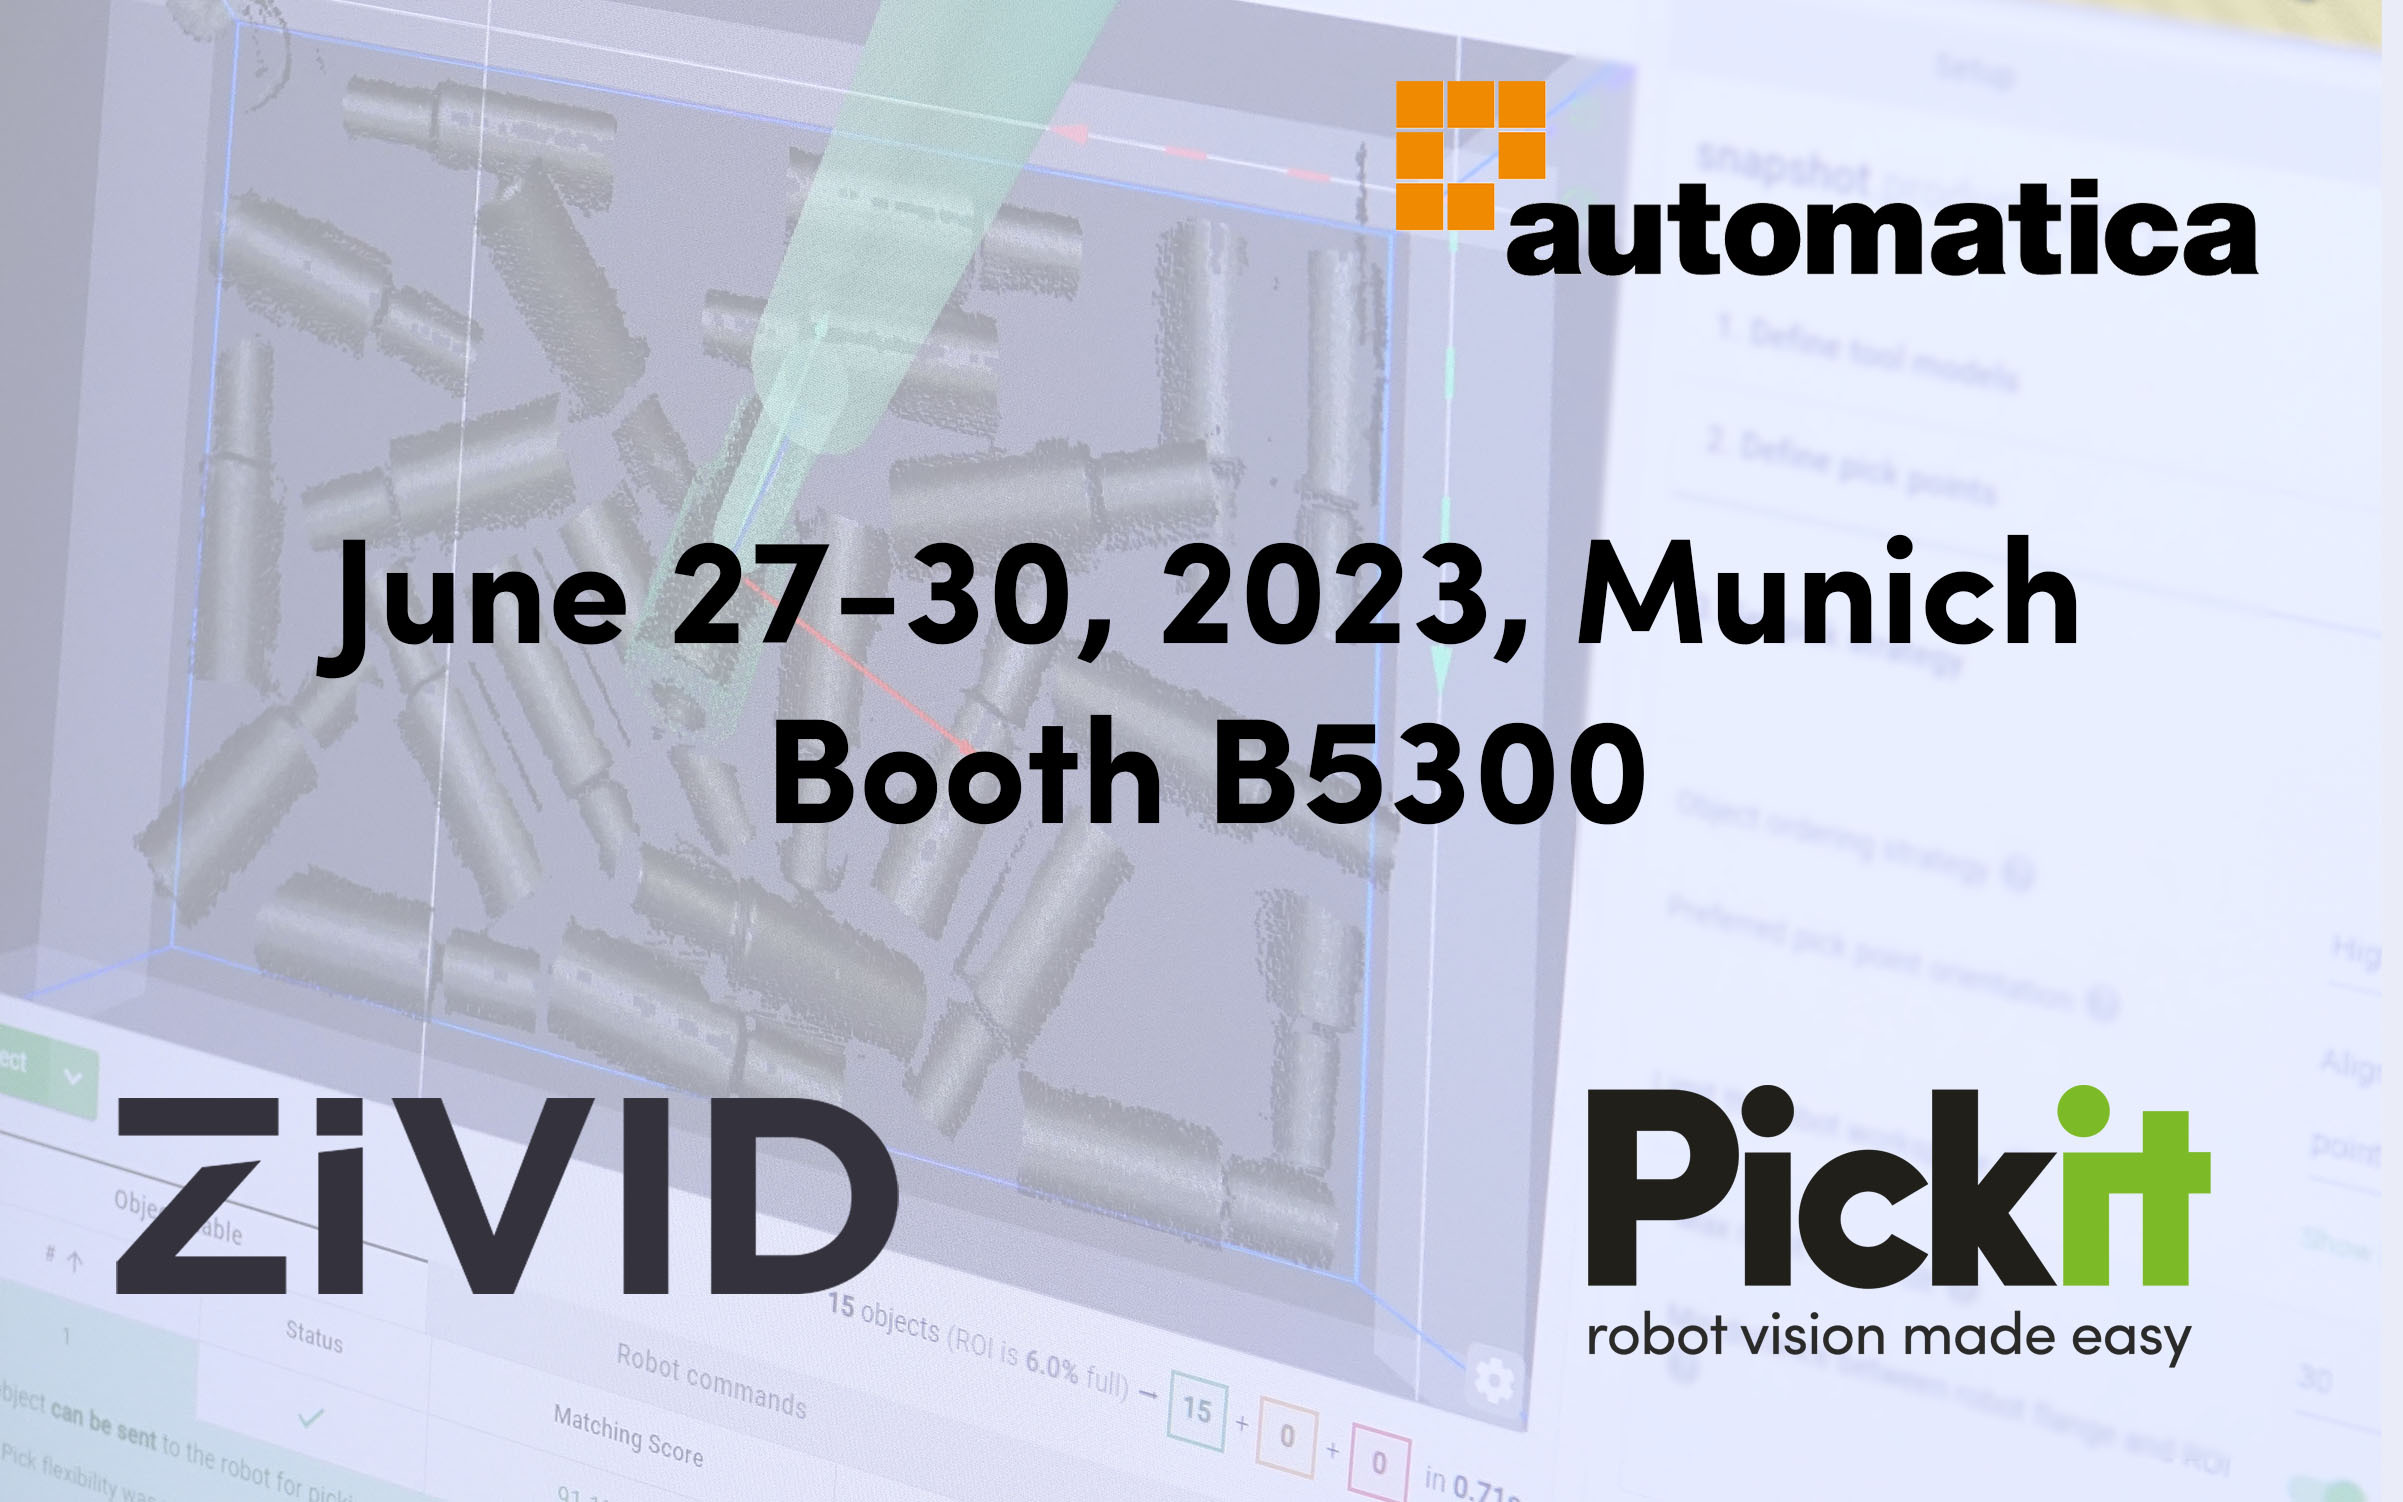 Get ready for Automatica 2023 in Munich